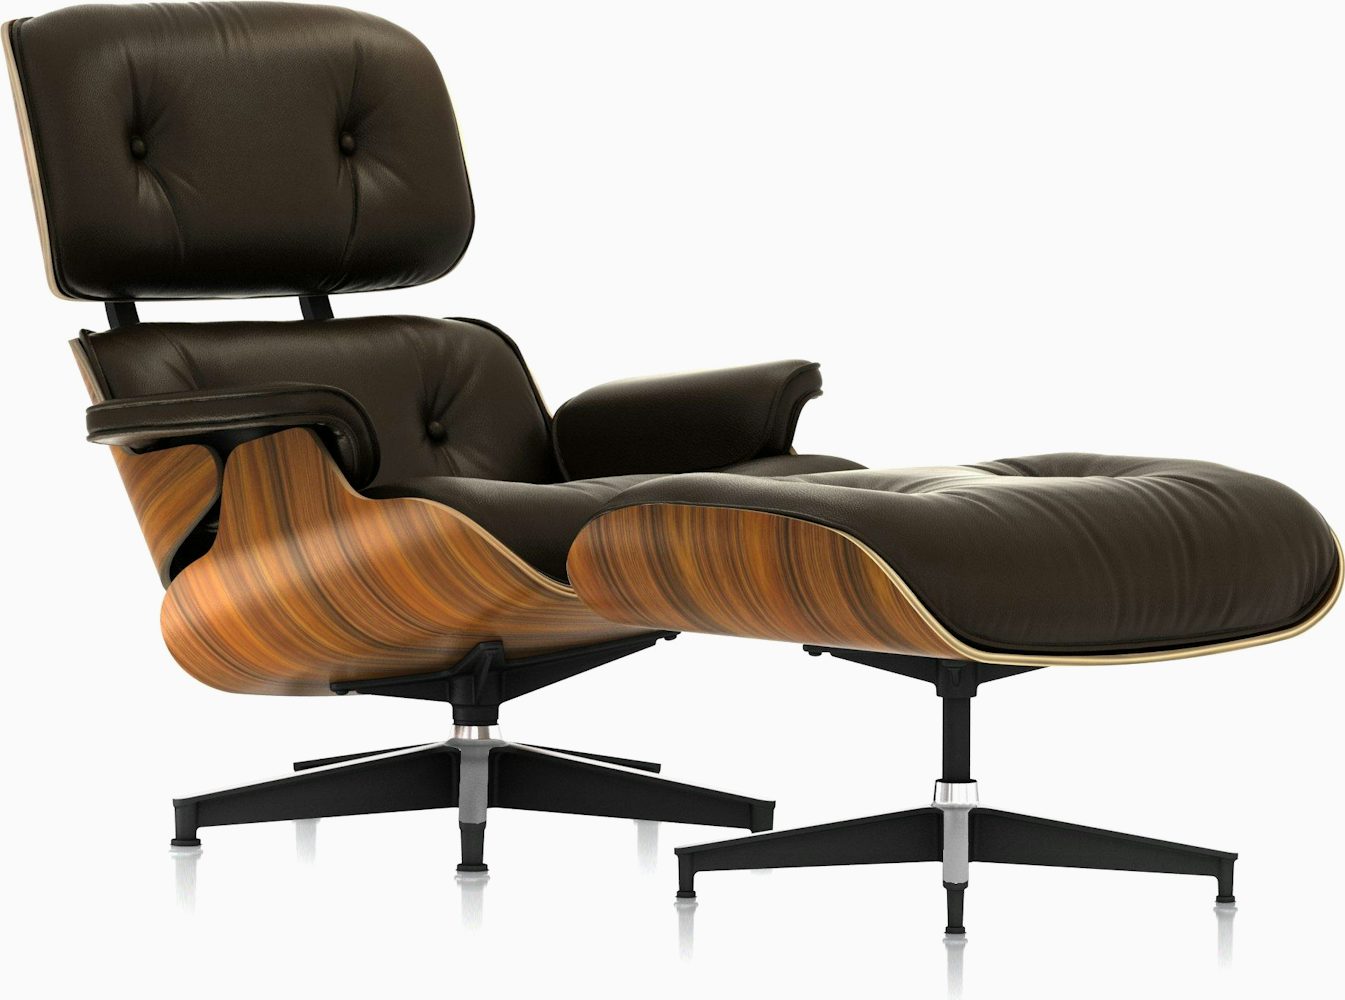 Liever Dempsey methaan Eames Lounge Chair and Ottoman - Herman Miller Store